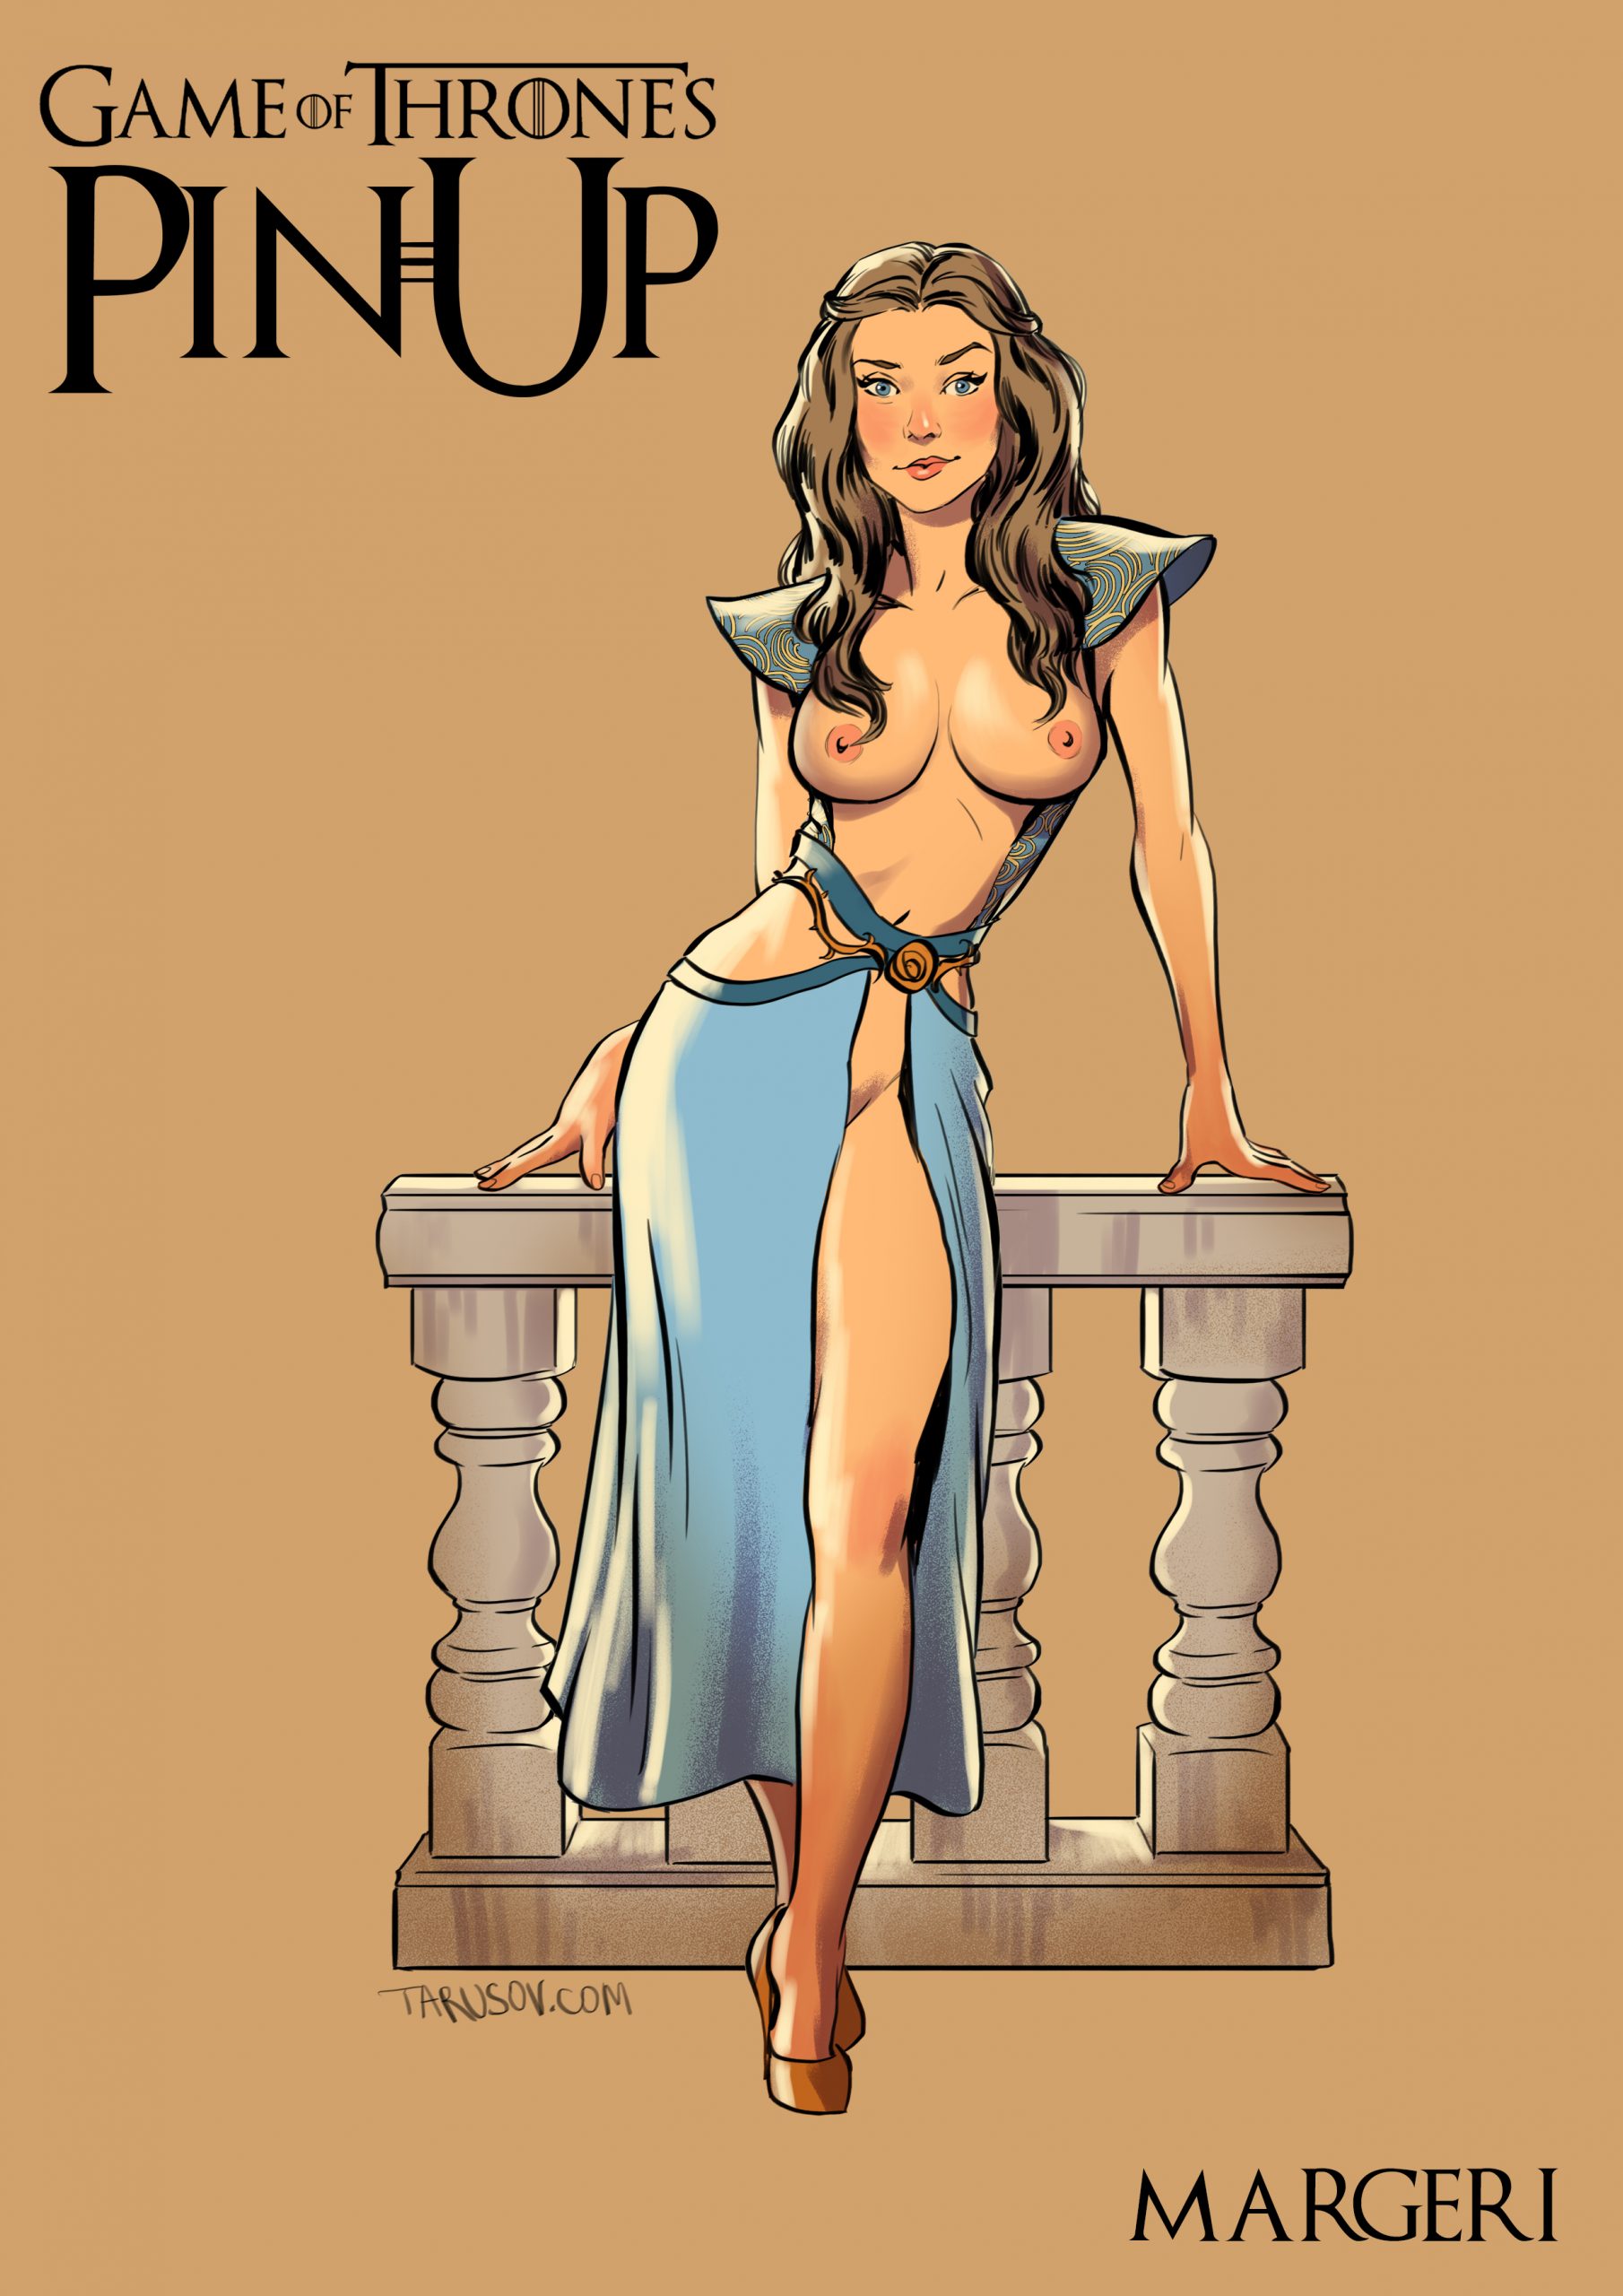 Cartoon Sex Game Of Thrones - Game of Thrones, pinup